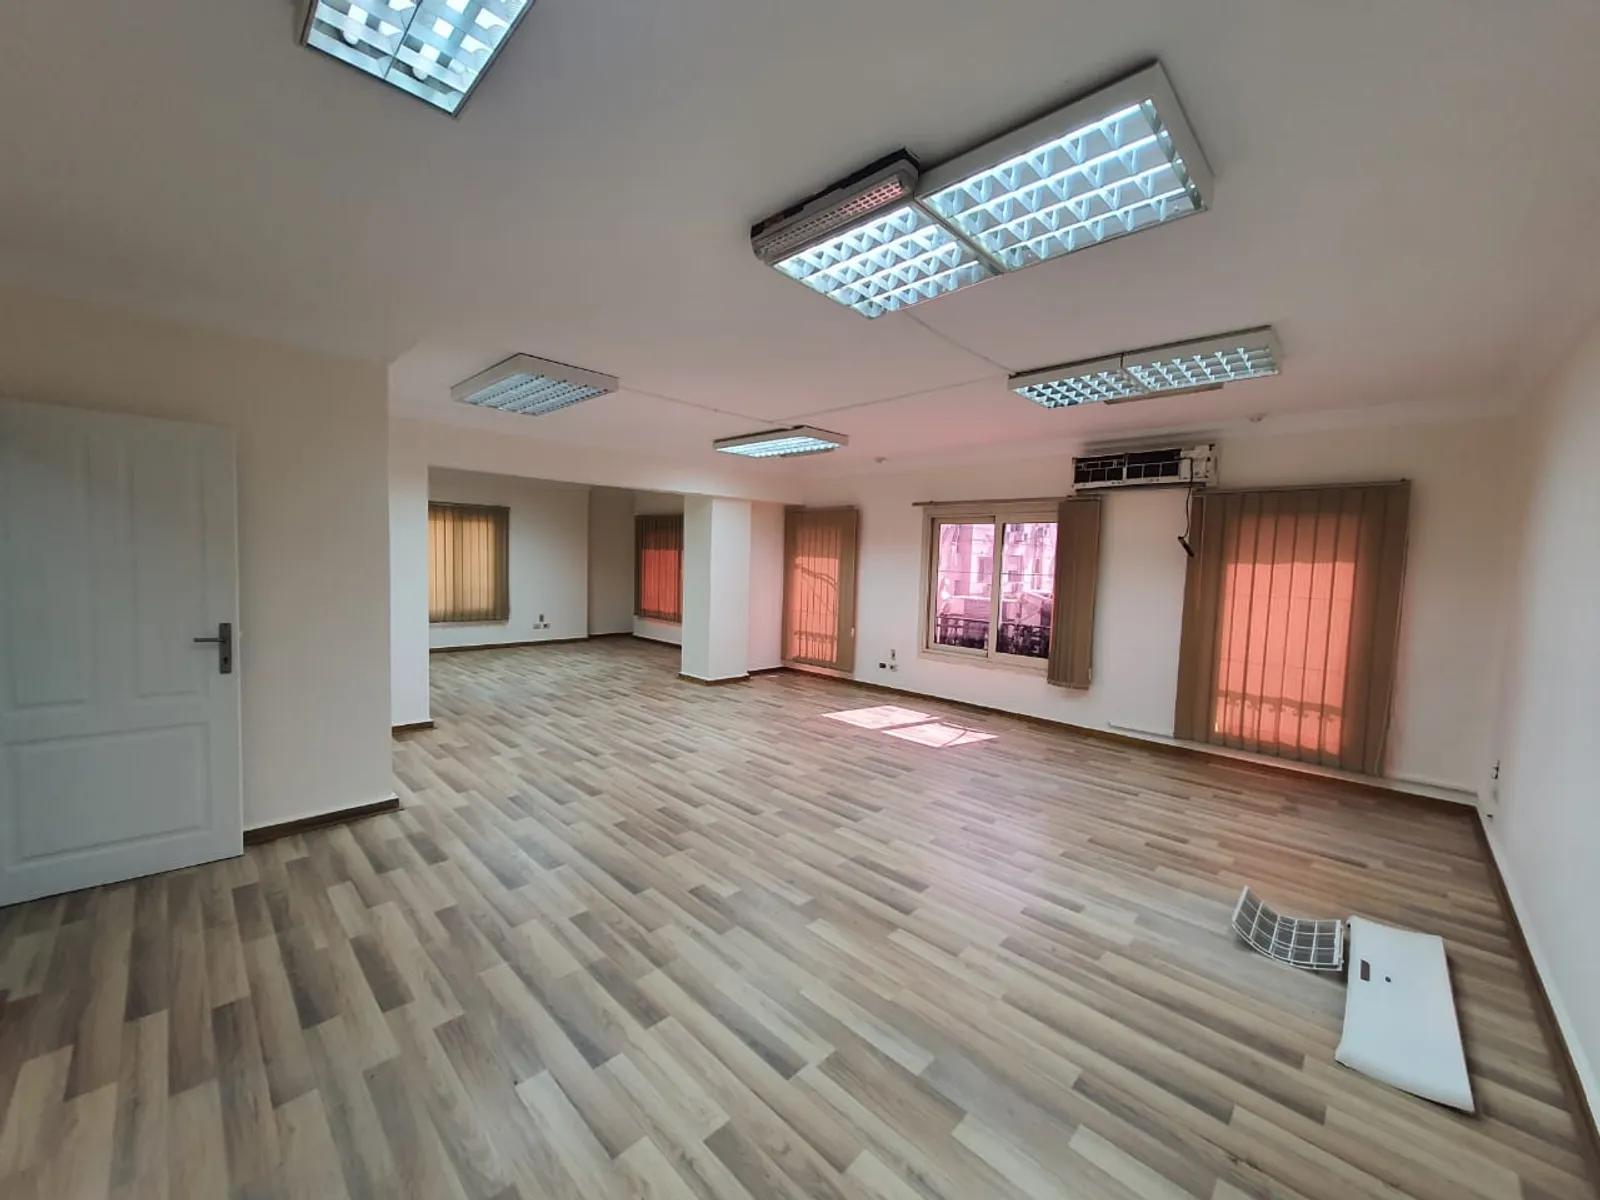 Office spaces For Sale In Maadi Maadi Sarayat Area: 210 m² consists of 4 Bedrooms 2 Bathrooms Semi furnished 5 stars #5565